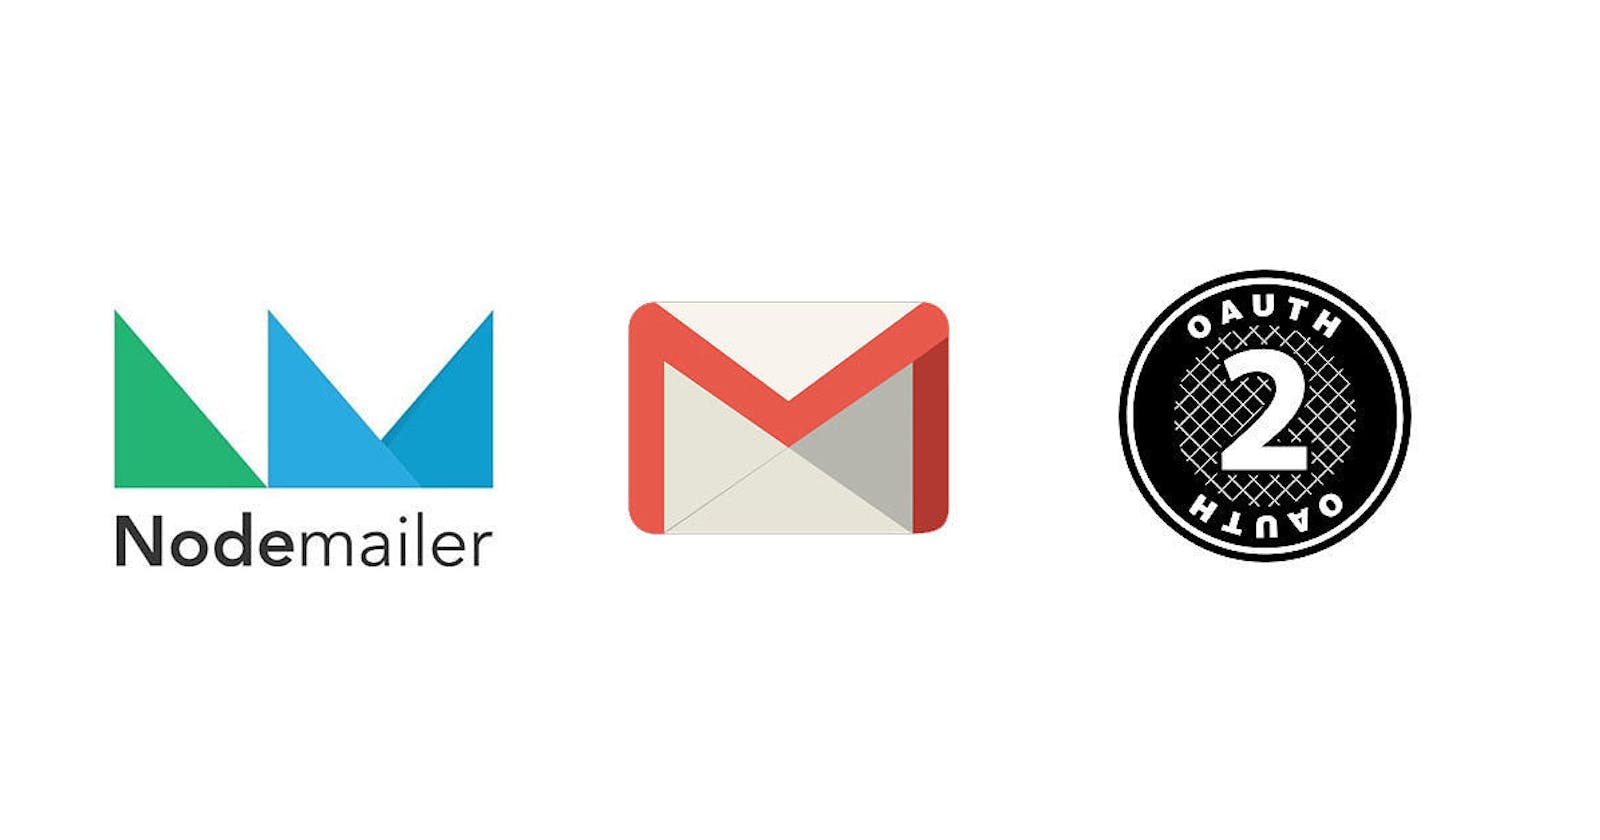 How to Use Nodemailer to Send Emails from Your Node.js Server